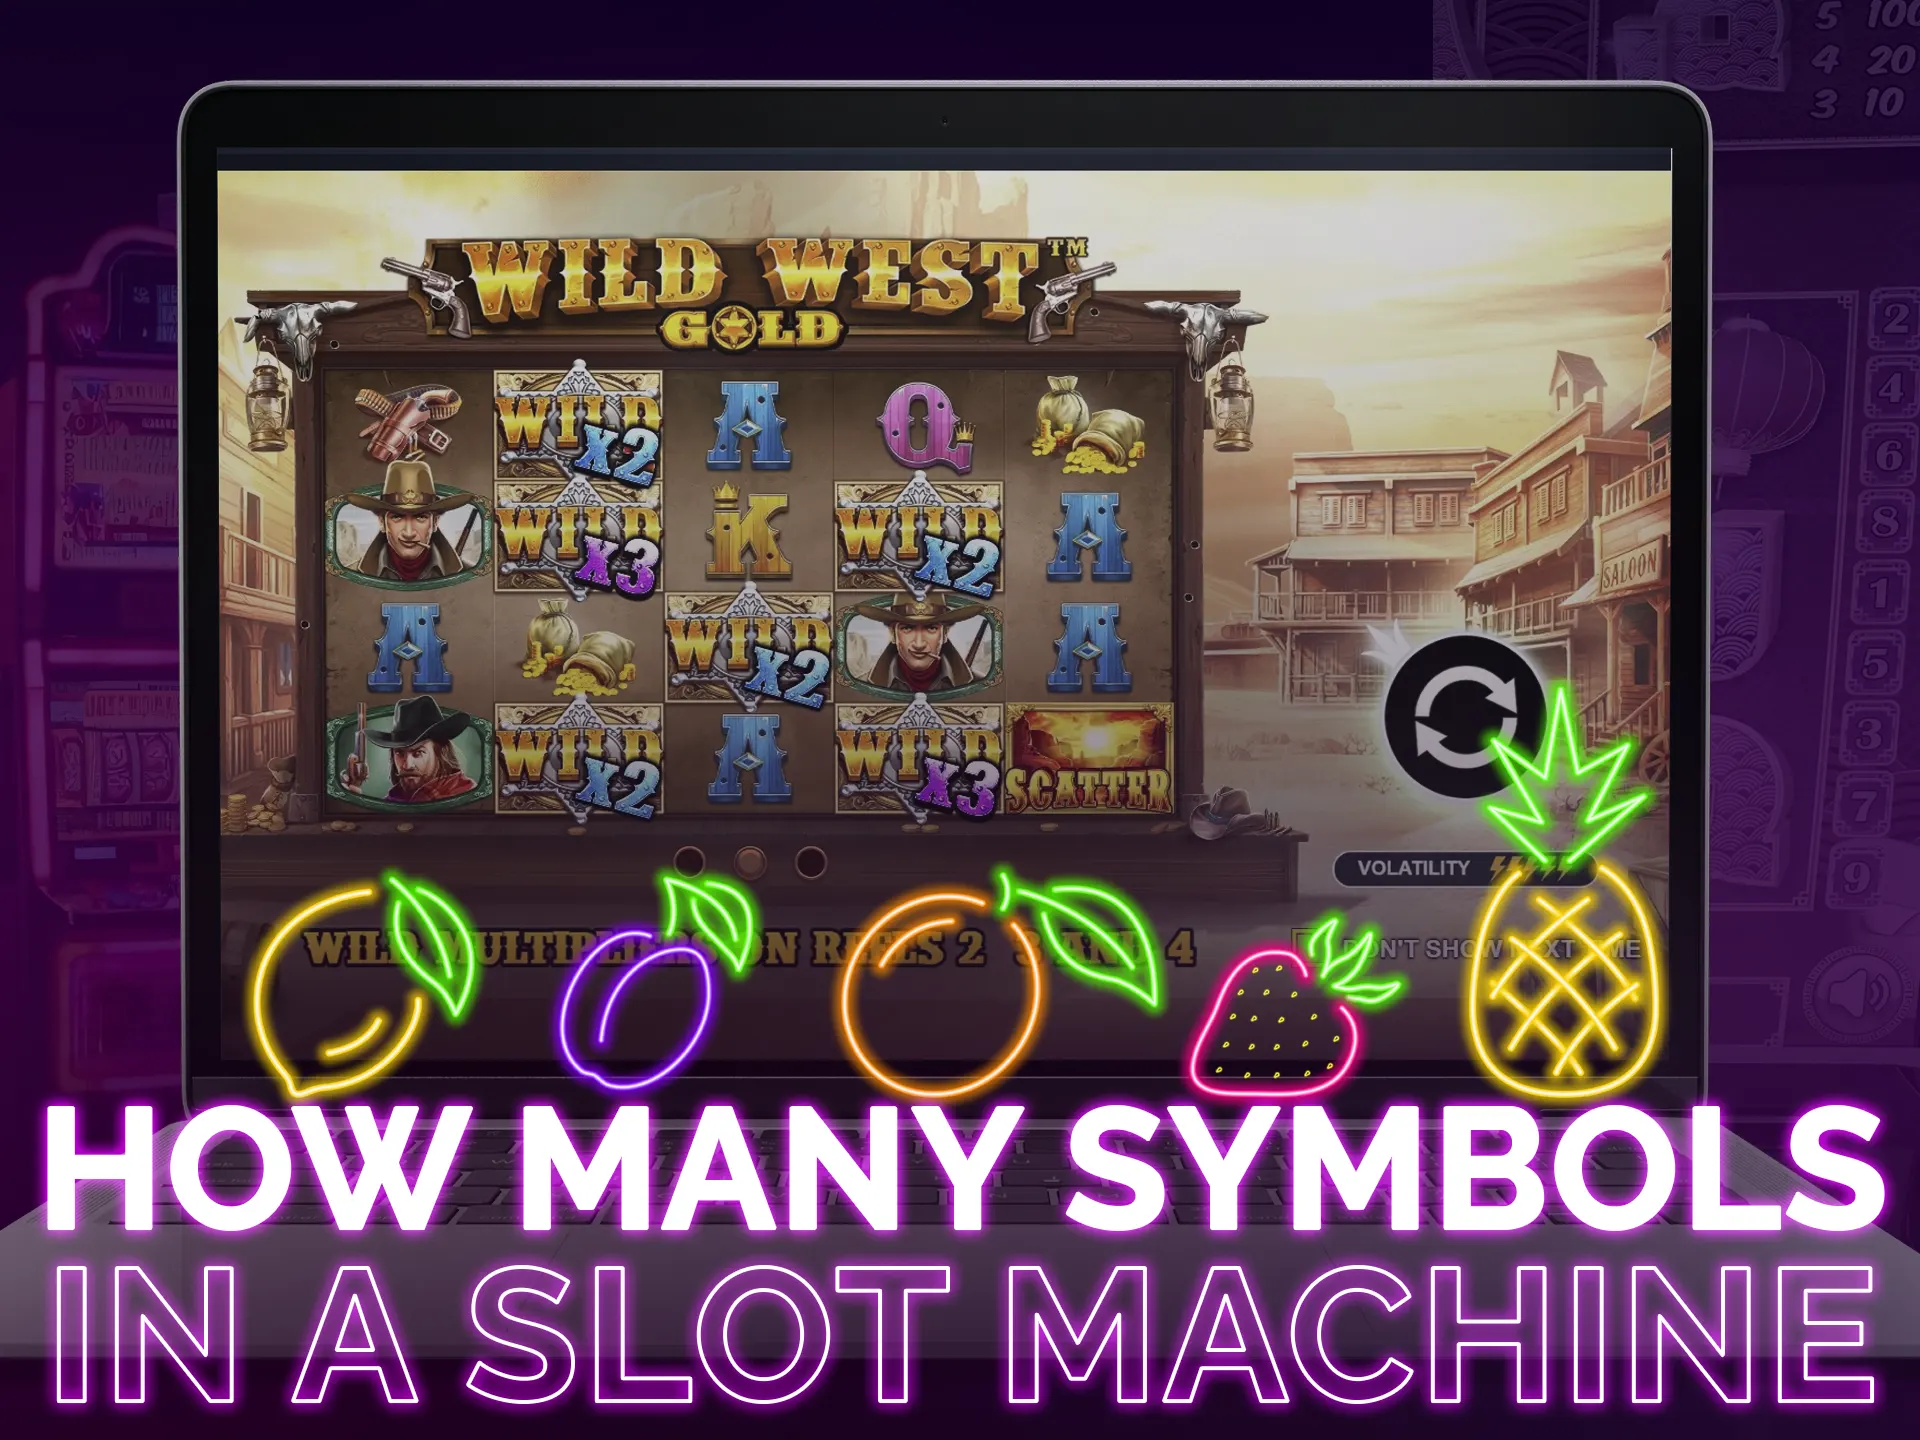 Slot machines vary in symbols, with unique ones usually around 15.